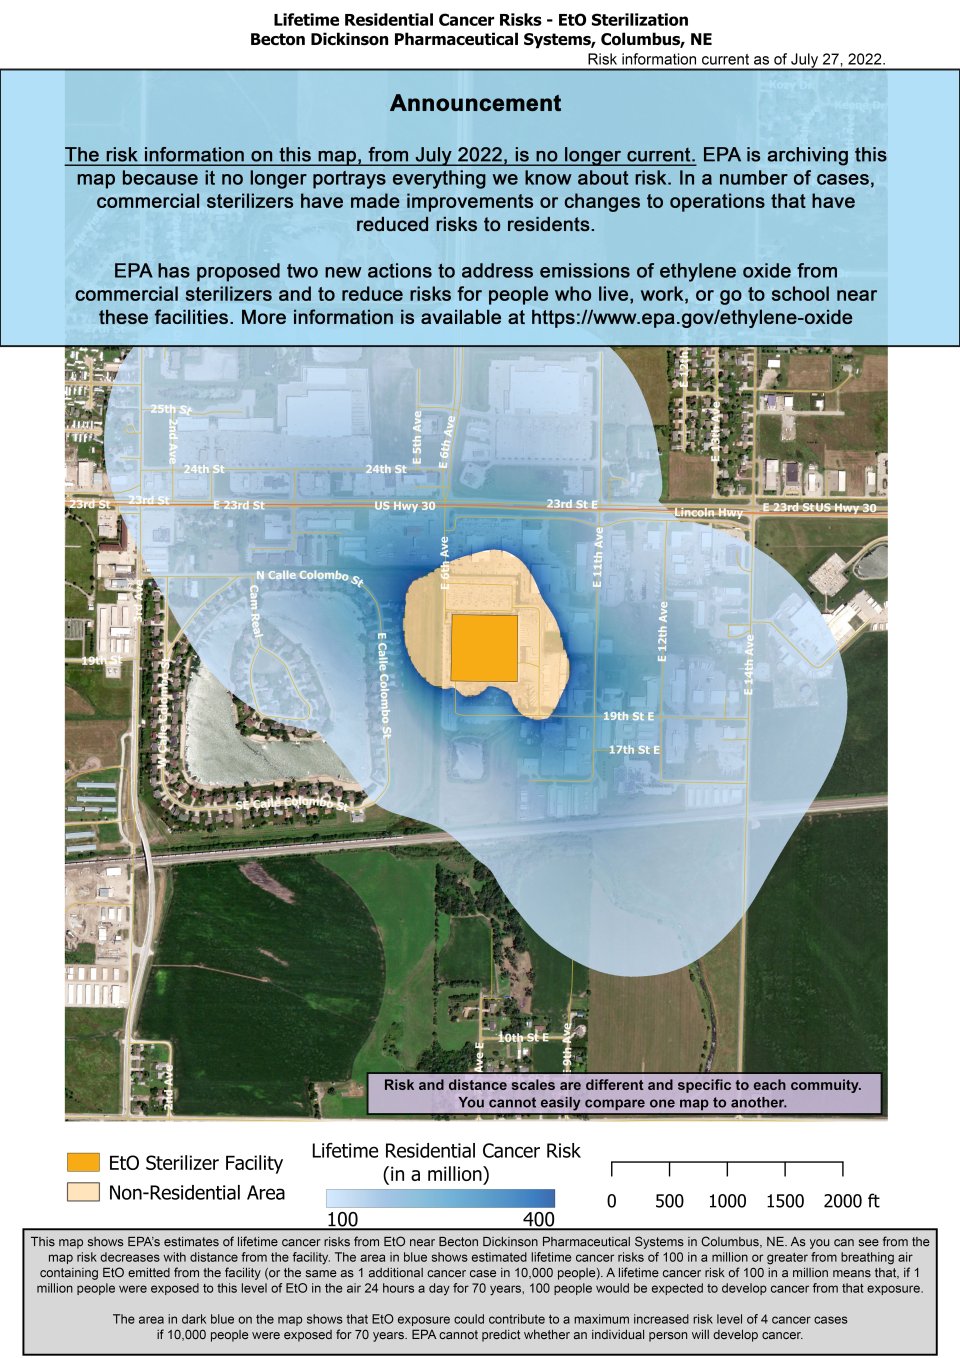 This map shows EPA’s estimate of lifetime cancer risks from breathing ethylene oxide in ambient air near Becton Dickinson Pharmaceutical Systems, 920 E. 19th Street, Columbus, NE. Estimated cancer risk decreases with distance from the facility.  Nearest the facility, the estimated lifetime cancer risk is 400 in a million. This risk drops to 100 in a million and extends to 8th street to the south, 10th avenue to the west, almost to 23rd avenue to the east and 38th street to the north. 